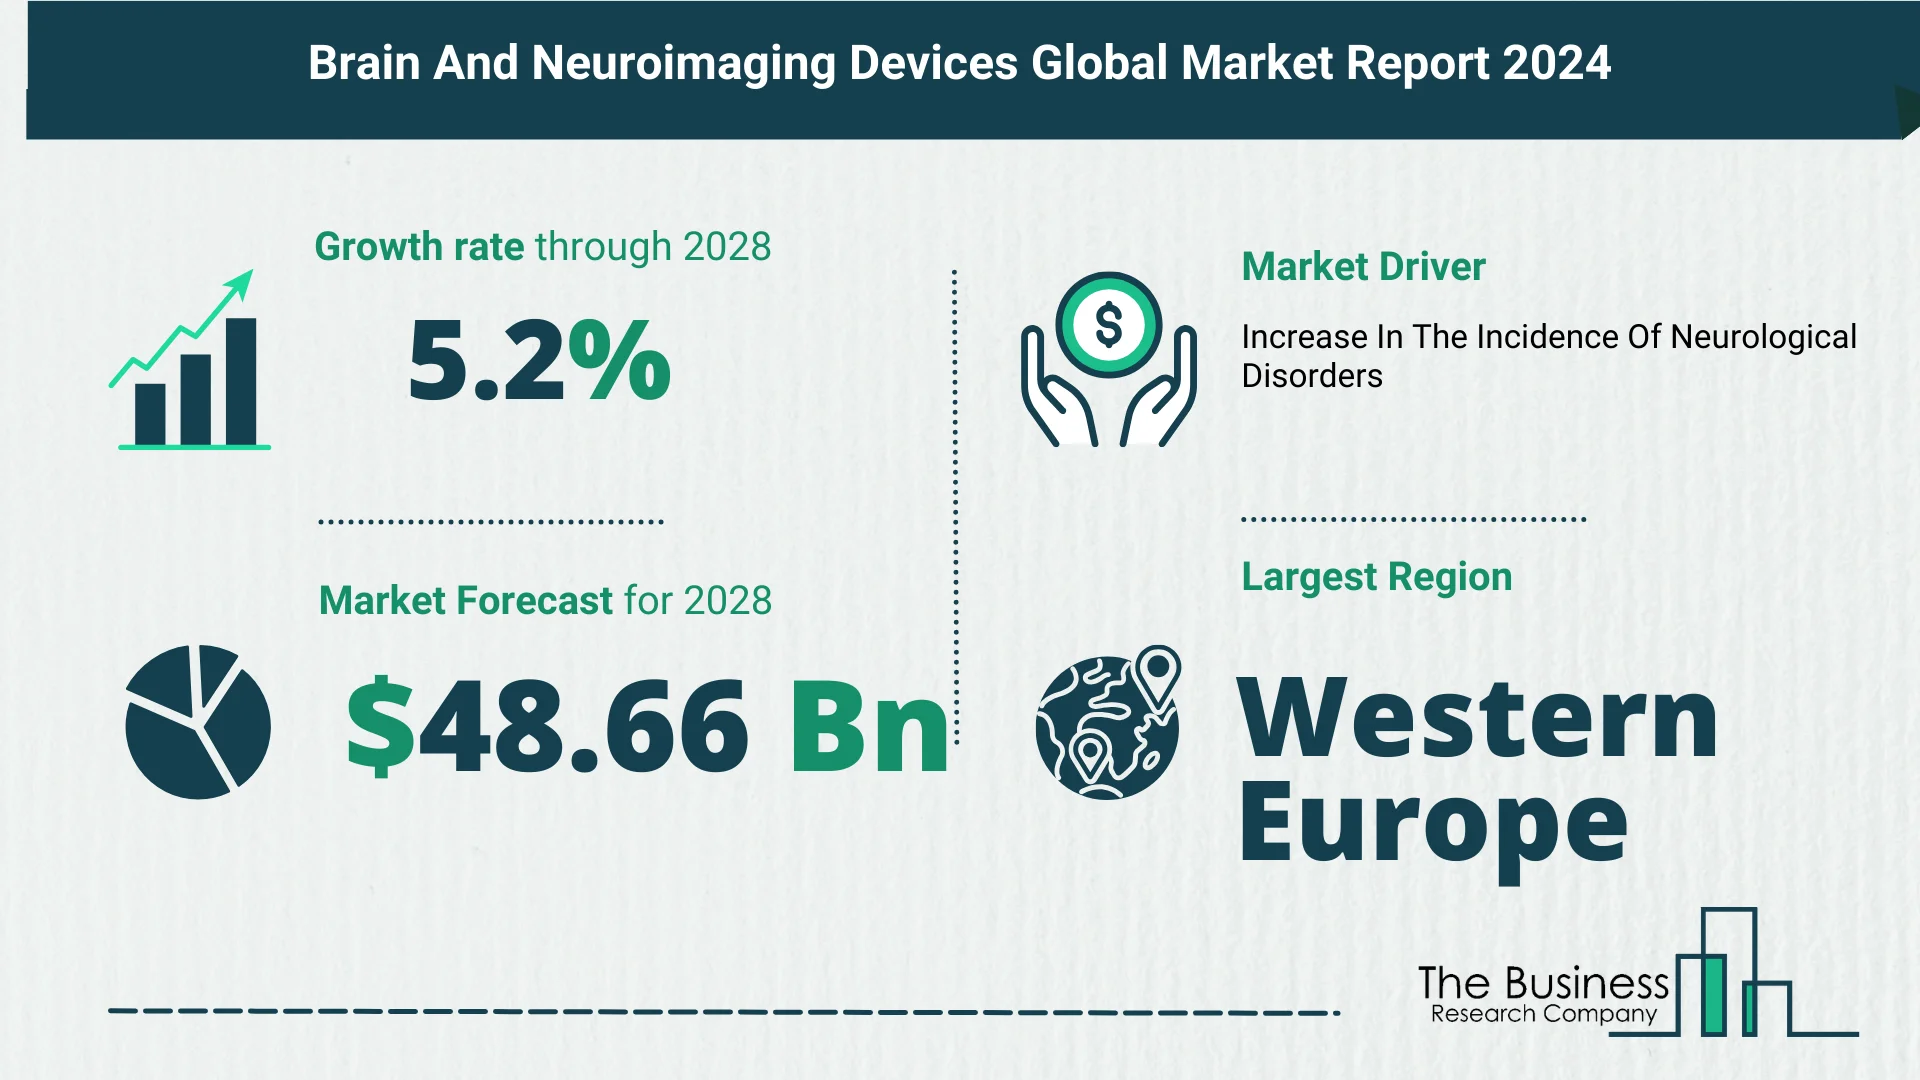 Top 5 Insights From The Brain And Neuroimaging Devices Market Report 2024 | GE HealthCare, Siemens AG, Koninklijke Philips, Canon Medical Systems Corporation, Hitachi Medical Systems, Medtronic Plc